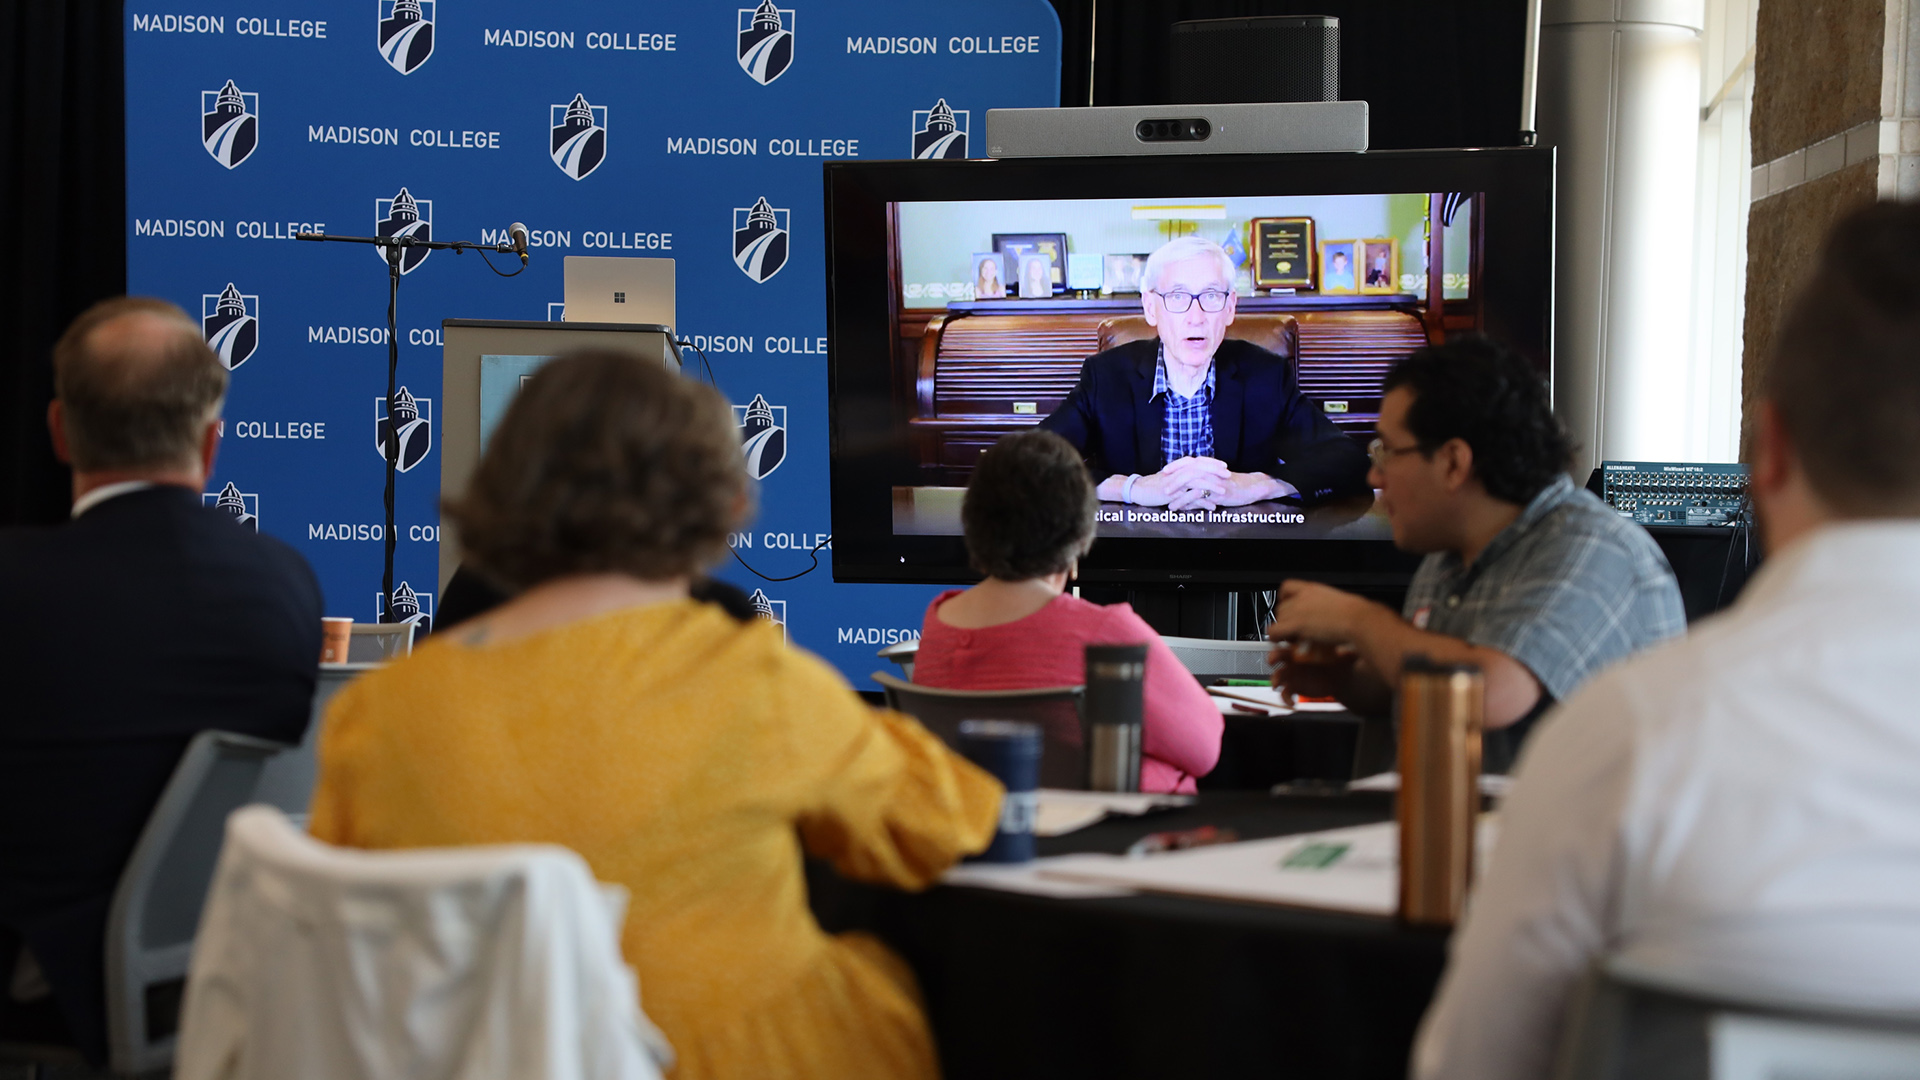 Multiple people seated in a room watch a video monitor showing Tony Evers speaking, in a room with a backdrop banner showing the words "Madison College" and its logo.